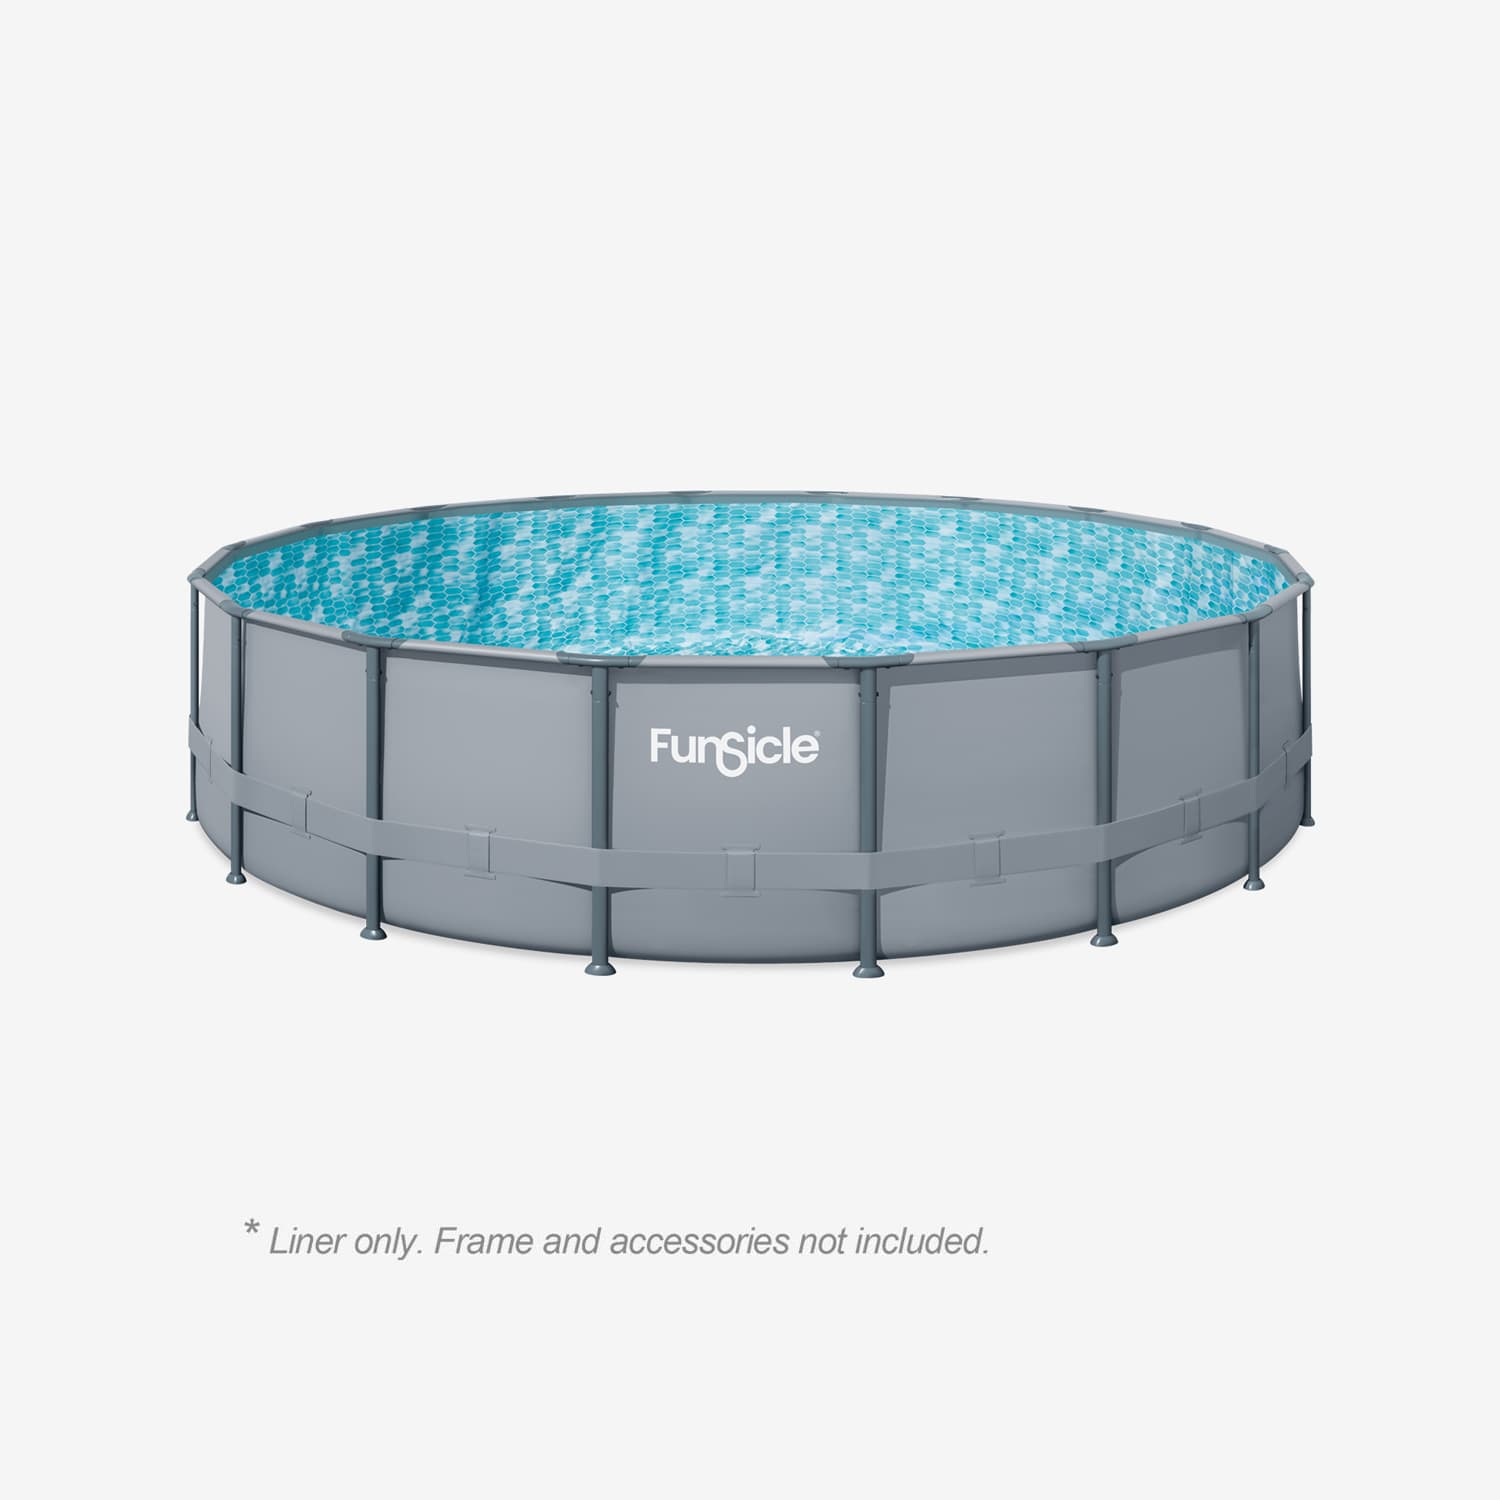  Funsicle 22 ft Oasis Pool Liner